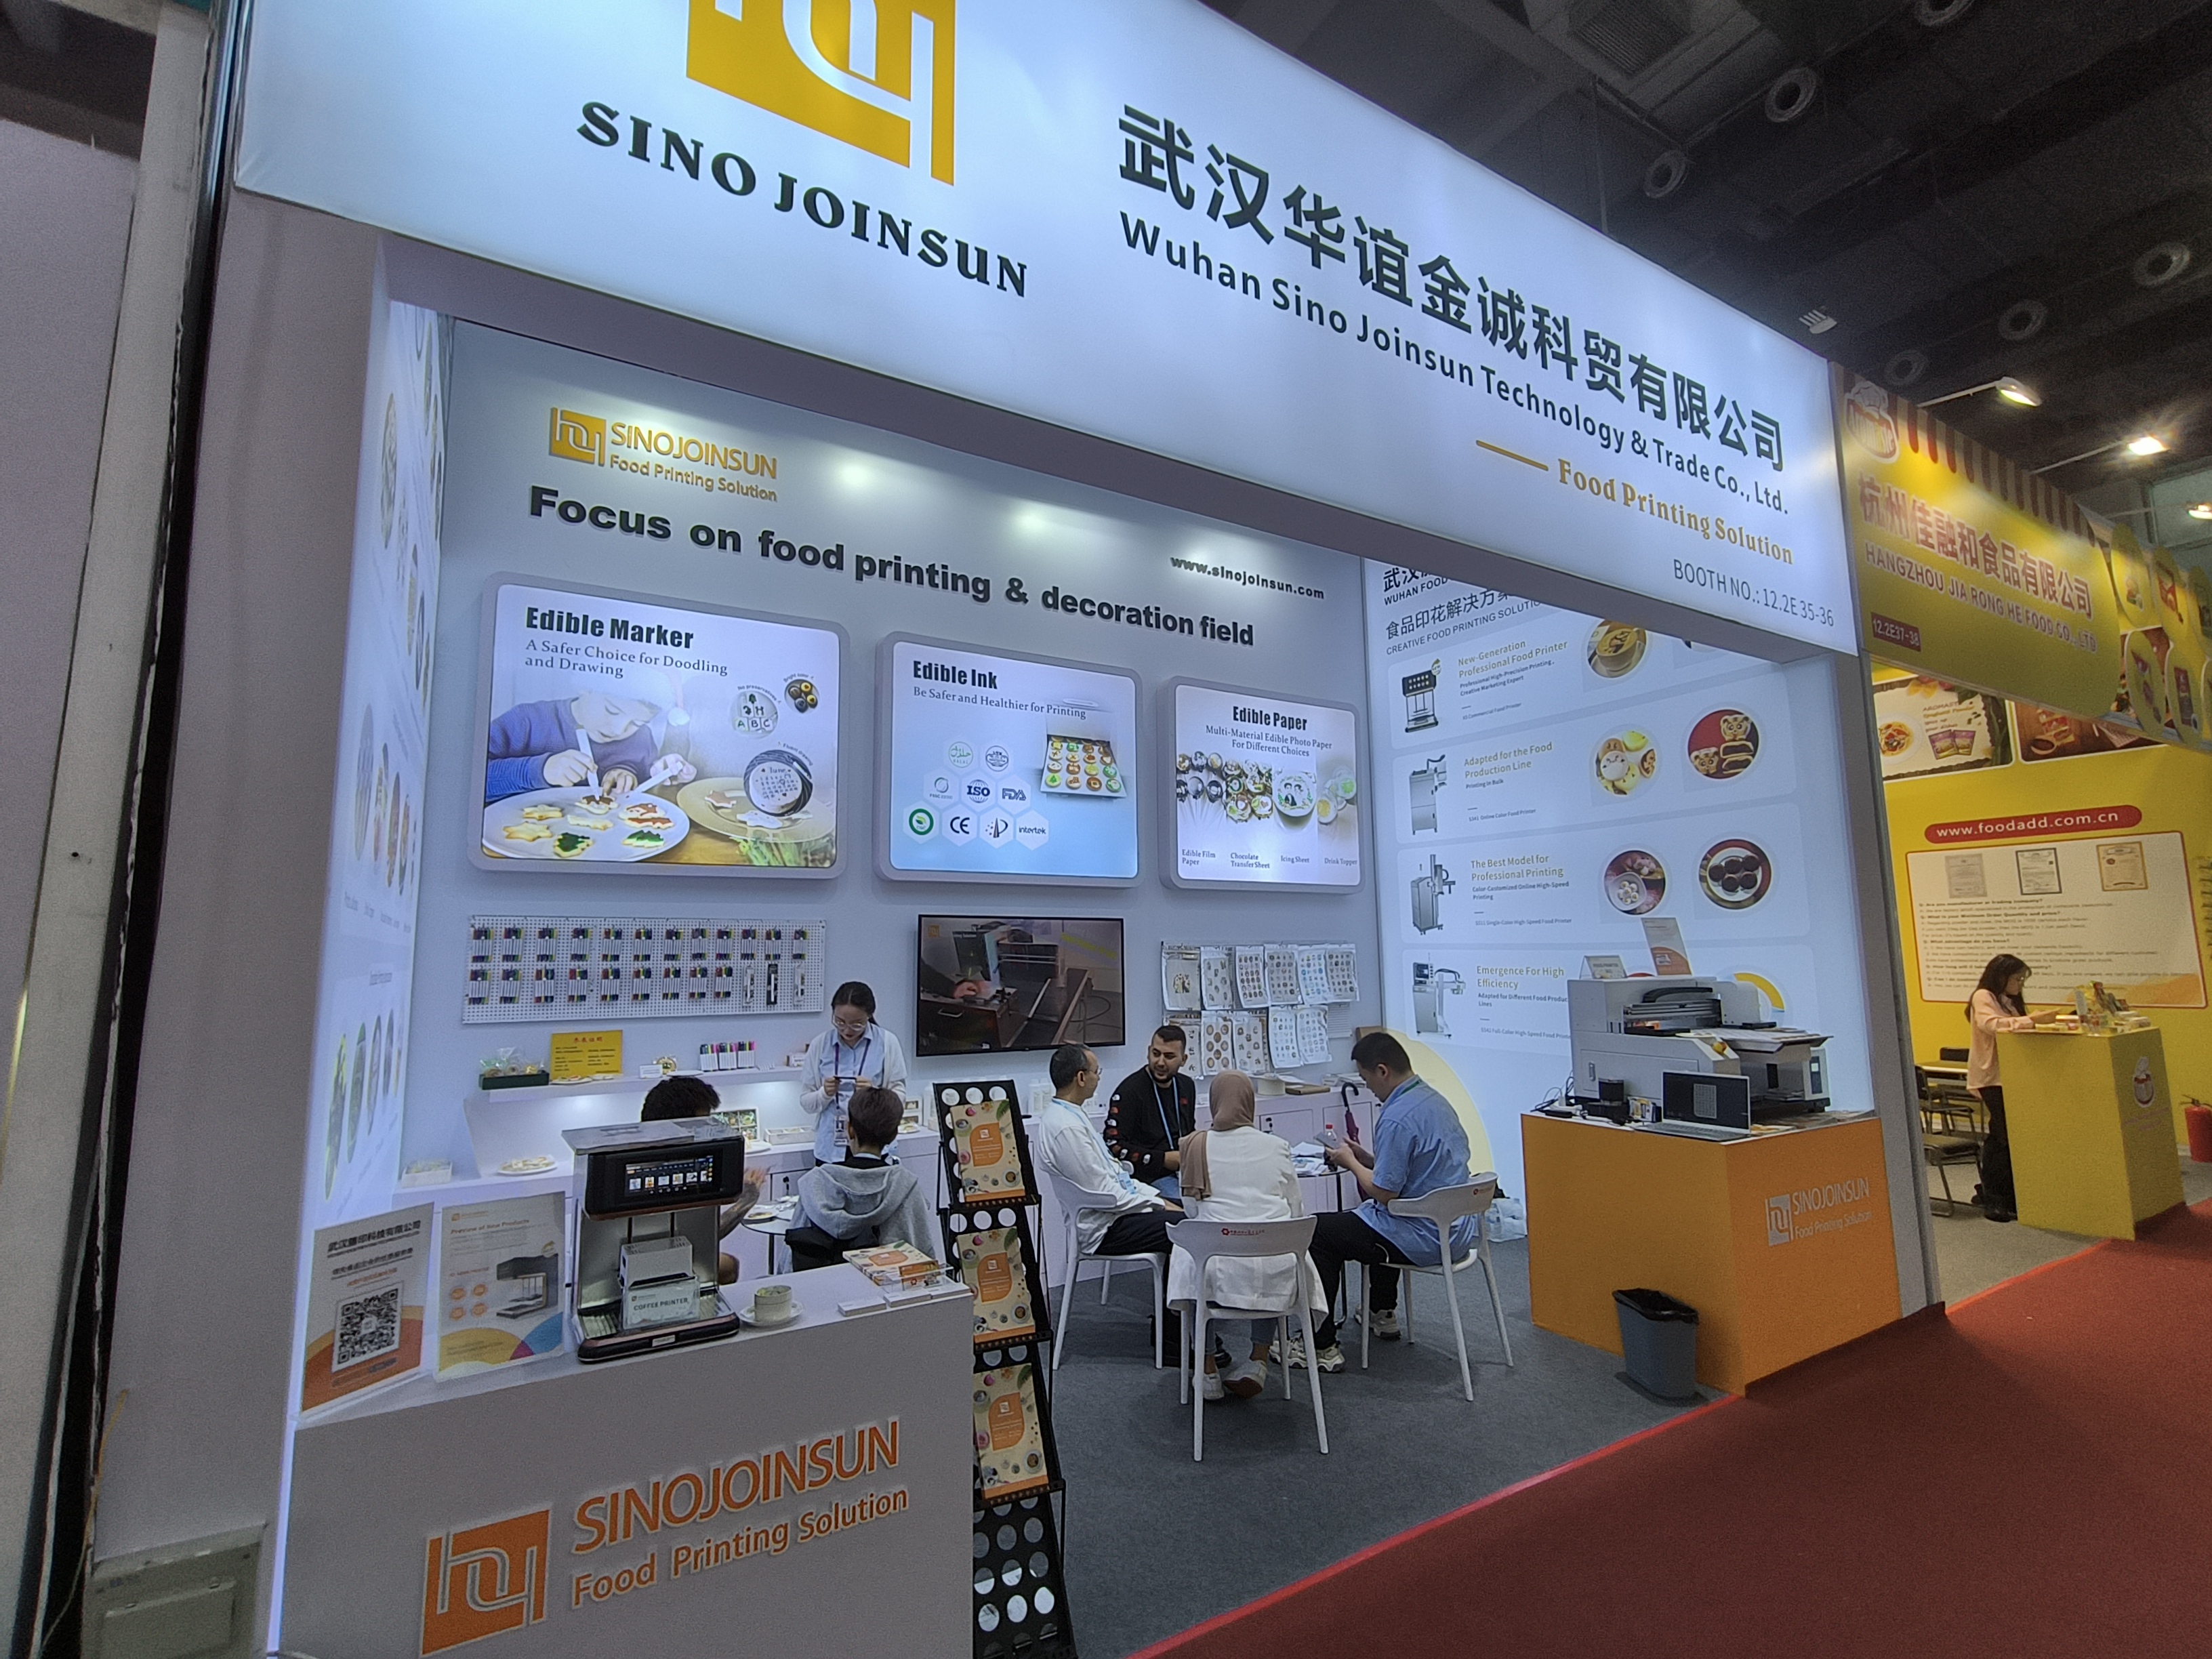 Our Affiliated Company Sinojoinsun's Exhibition Was Successfully Held And Ended Perfectly!